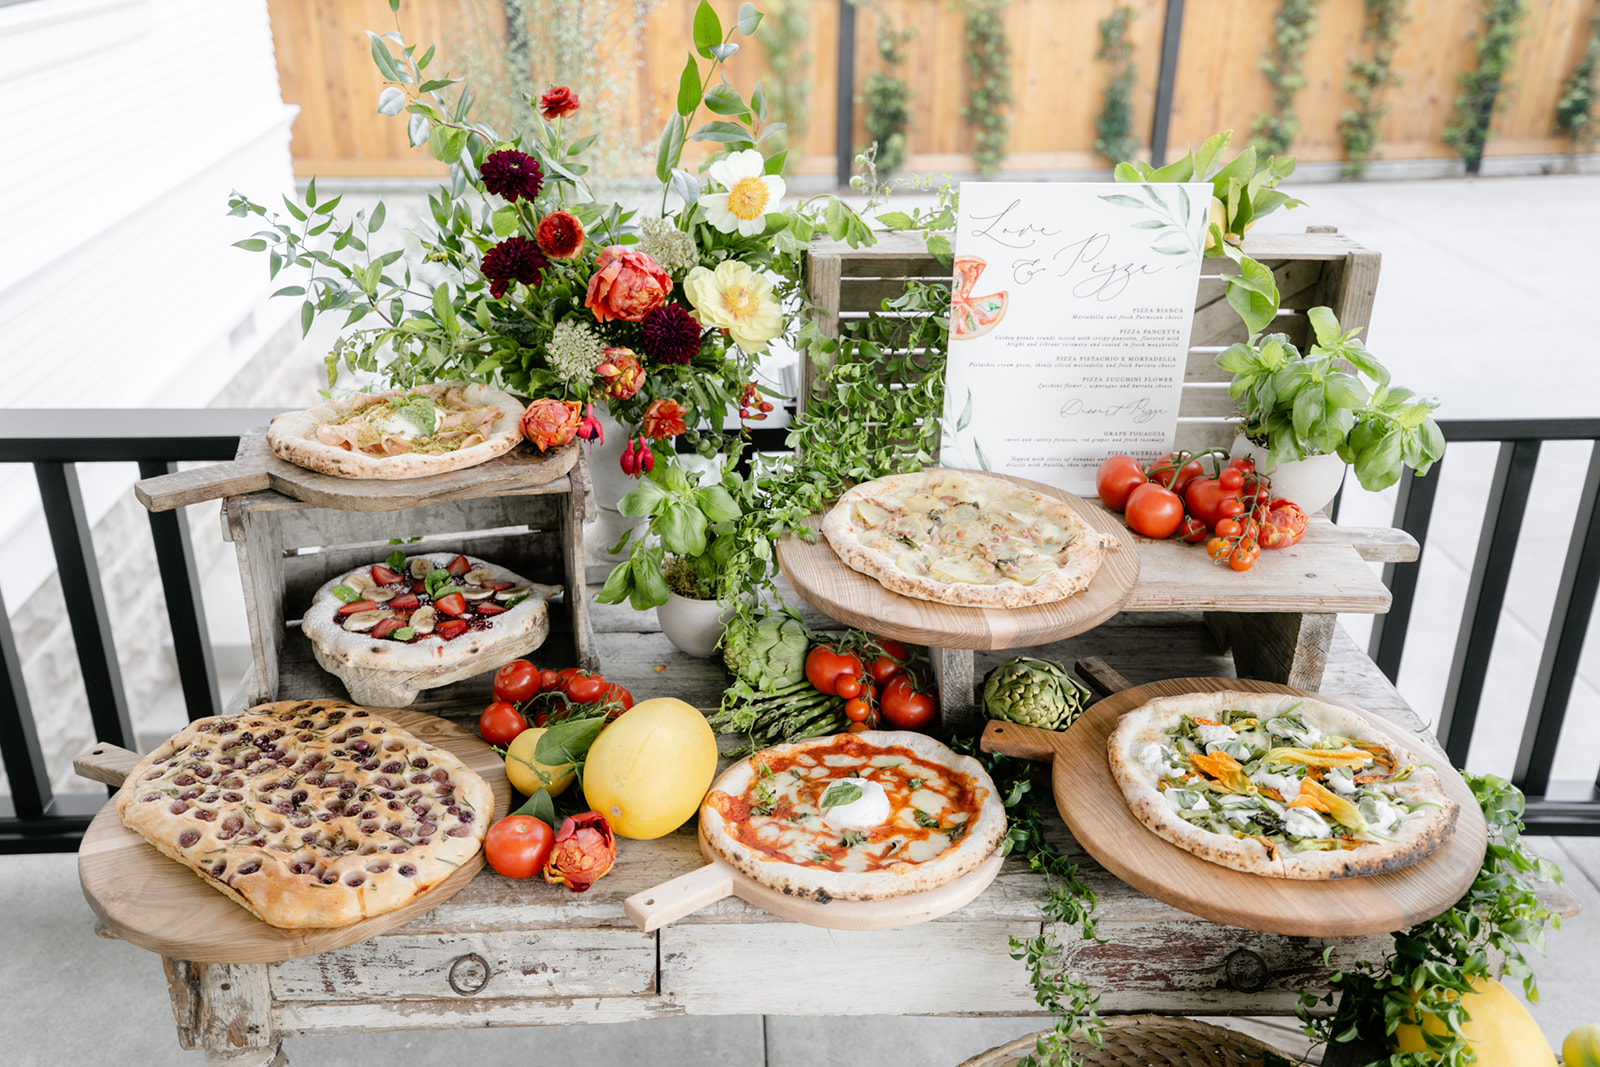 An Alfresco Summer Pizza Party Inspired by Italia!